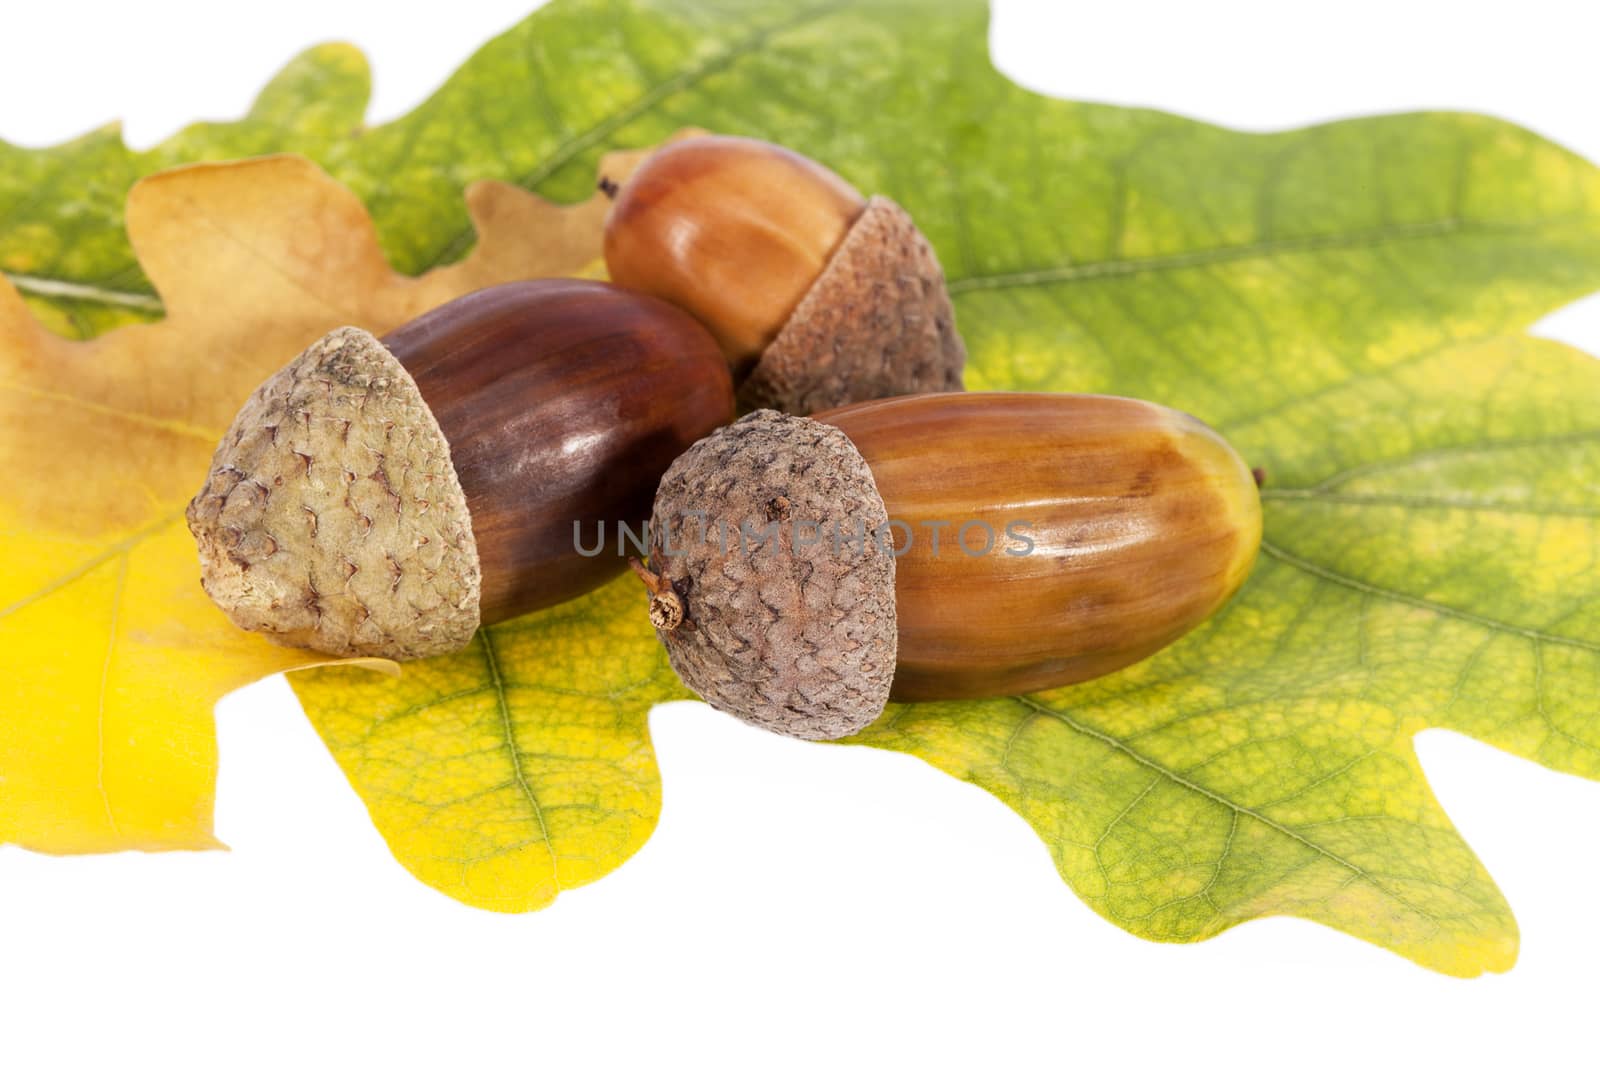  Acorns on oak leaves in autumnal colors on white background, close up